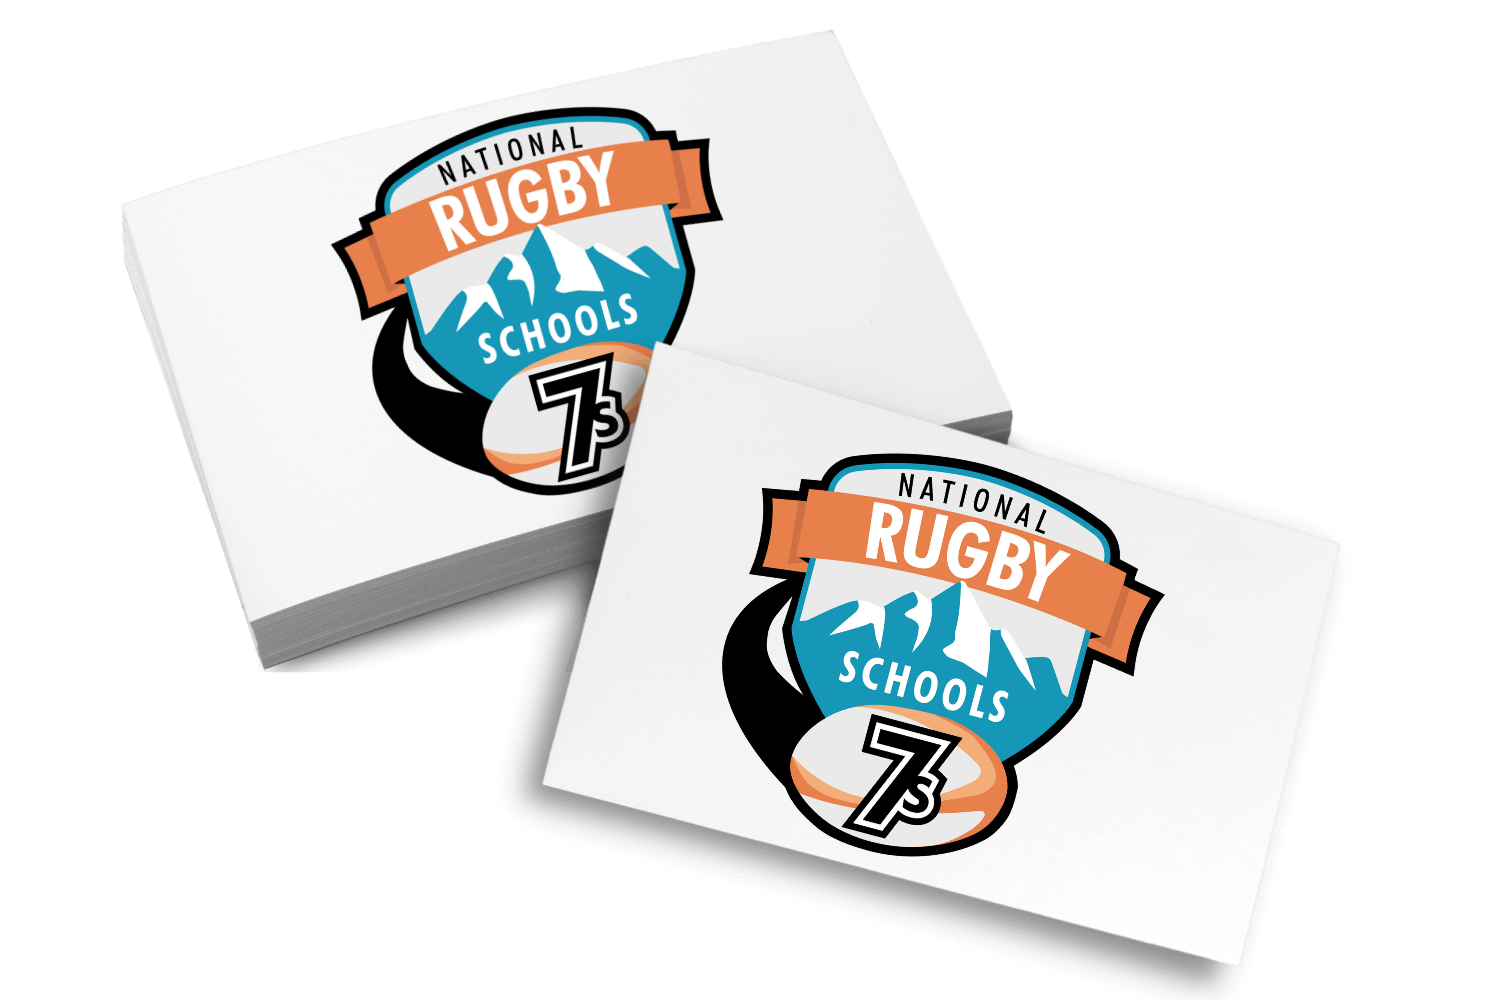 National rugby company logo business card mockup graphic design at Big Red Jelly.